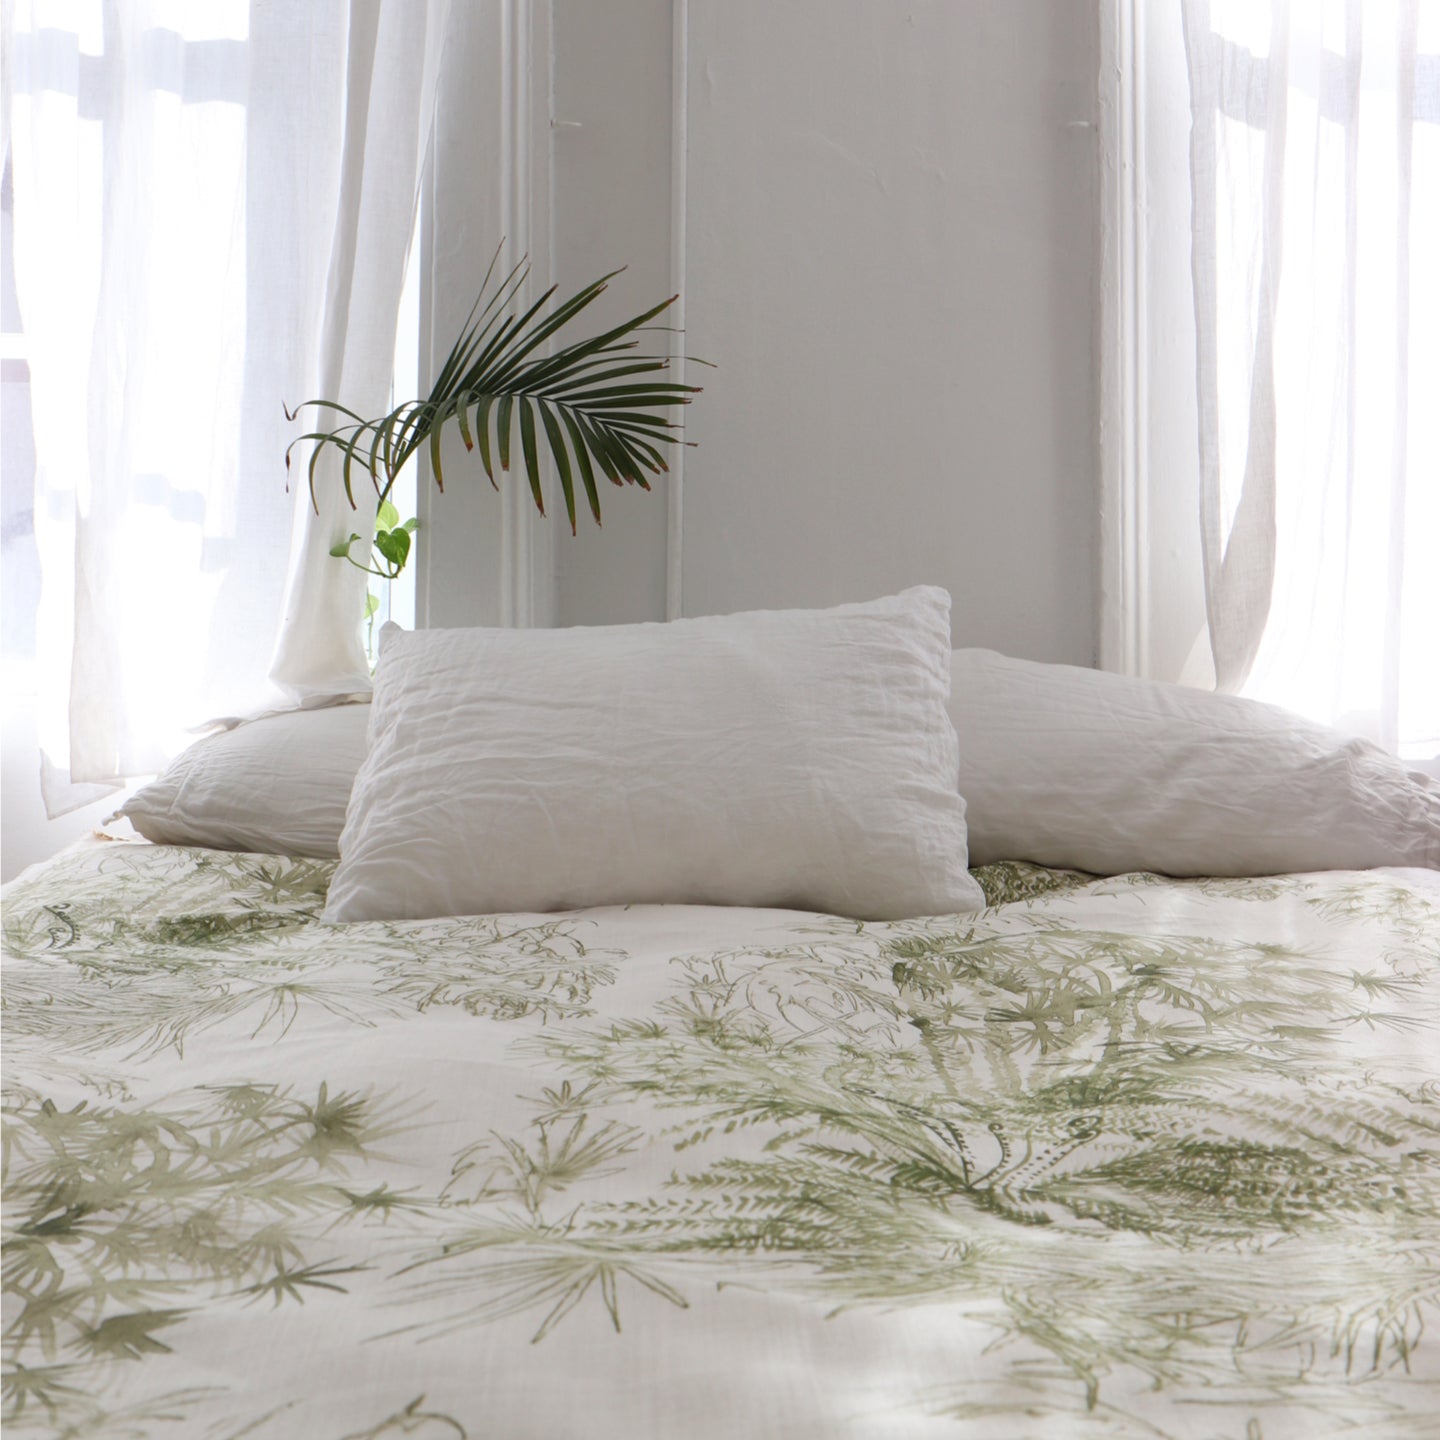 A bed with a plant on it